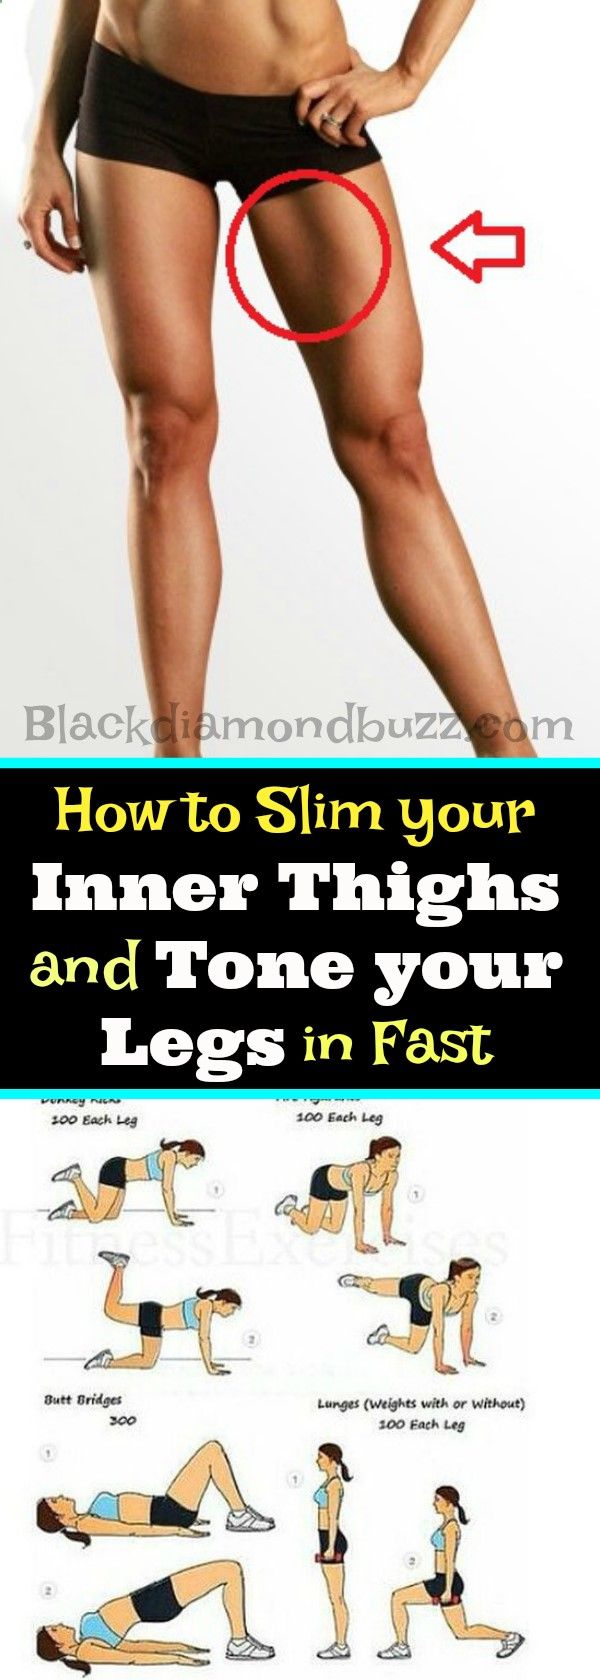 Fitness Motivation How To Slim Your Inner Thighs And Tone Your Legs In Fast In 30 Days These